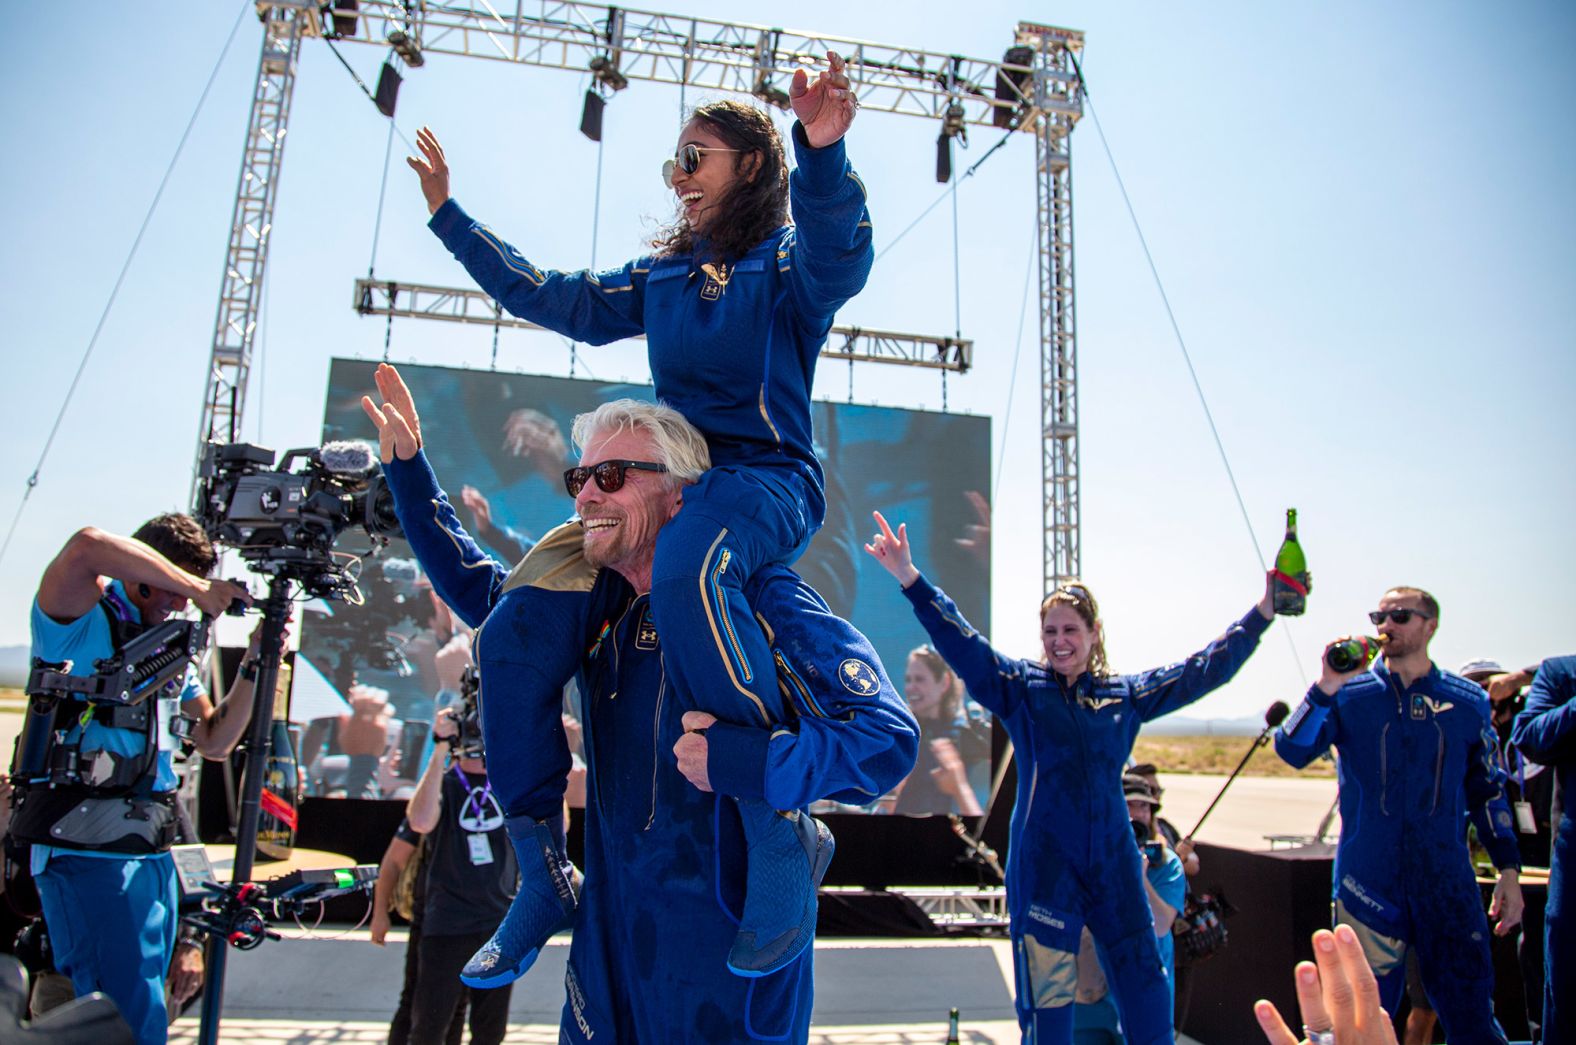 Branson carries crew member Sirisha Bandla on his shoulders while celebrating after landing back on Earth. Bandla is the second woman born in India to fly to space.